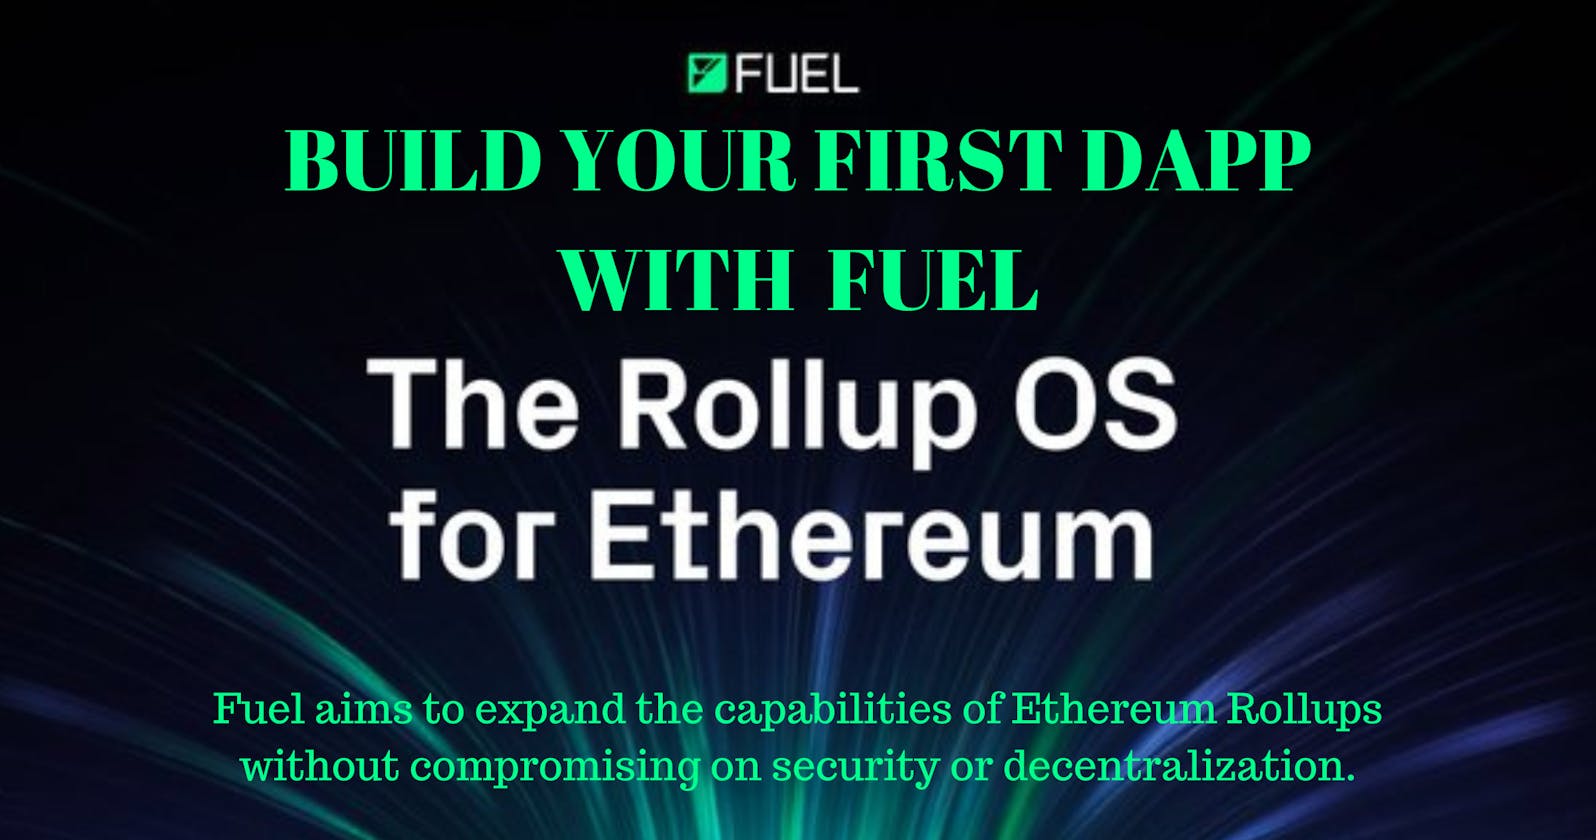 How to build your First Fuel DAPP